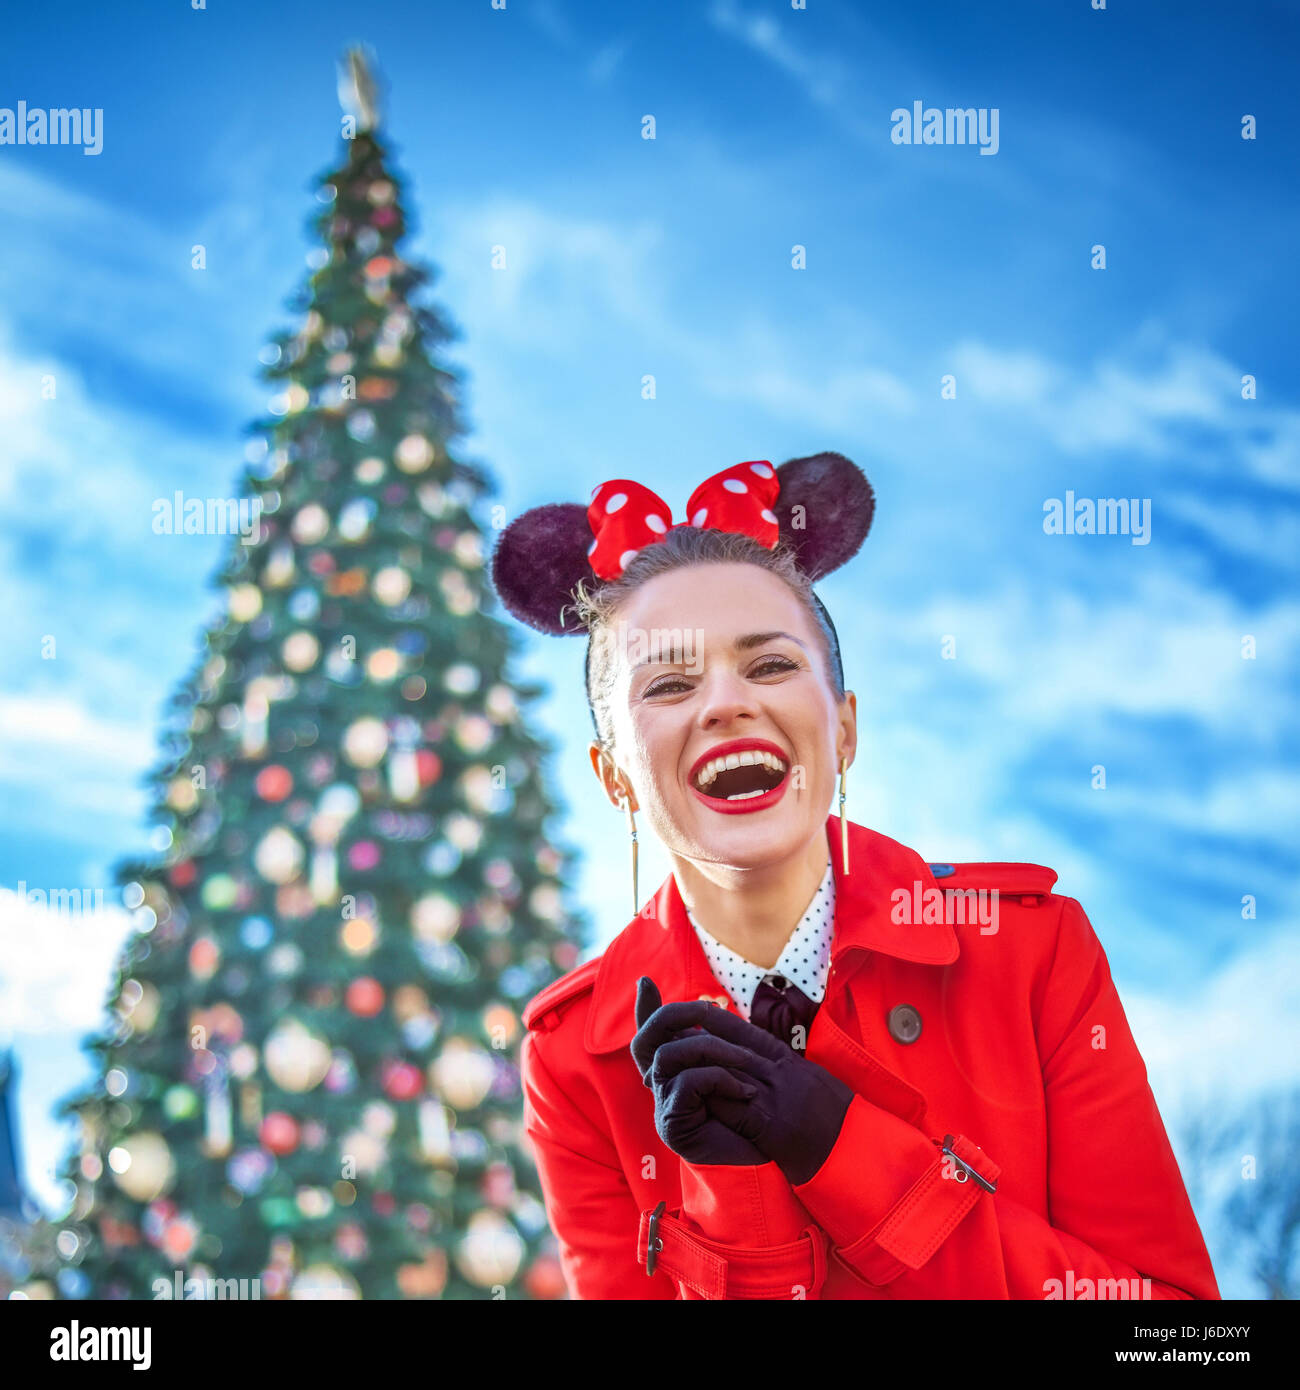 DISNEYLAND, FRANCE - DECEMBER, 8, 2016: smiling stylish woman in red trench coat in the front of big Christmas tree Stock Photo